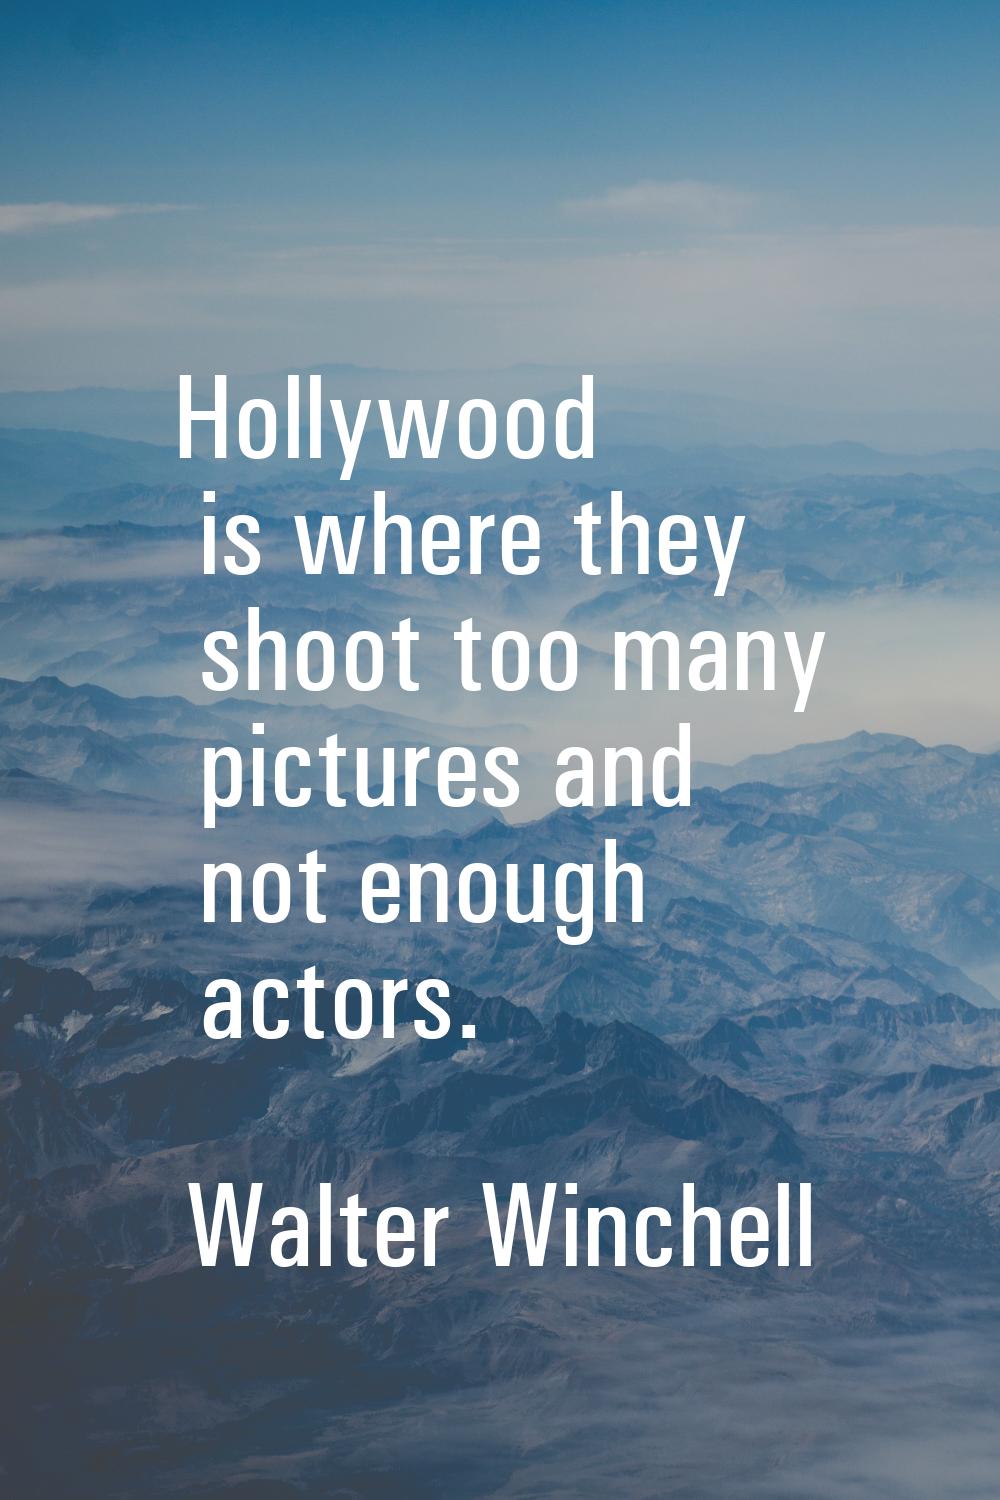 Hollywood is where they shoot too many pictures and not enough actors.